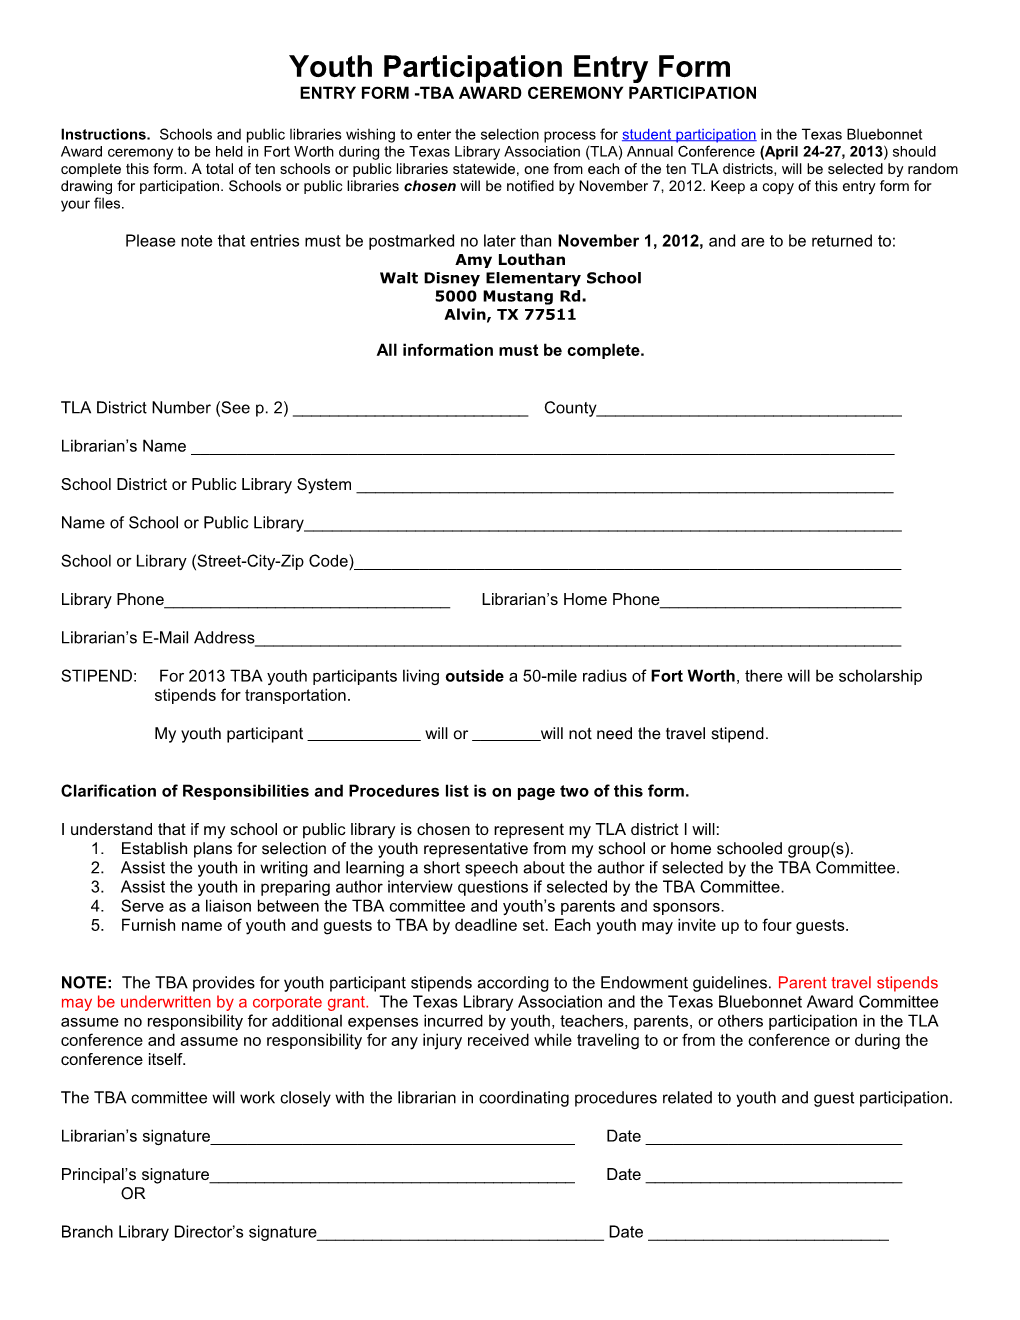 Student Participation Entry Form